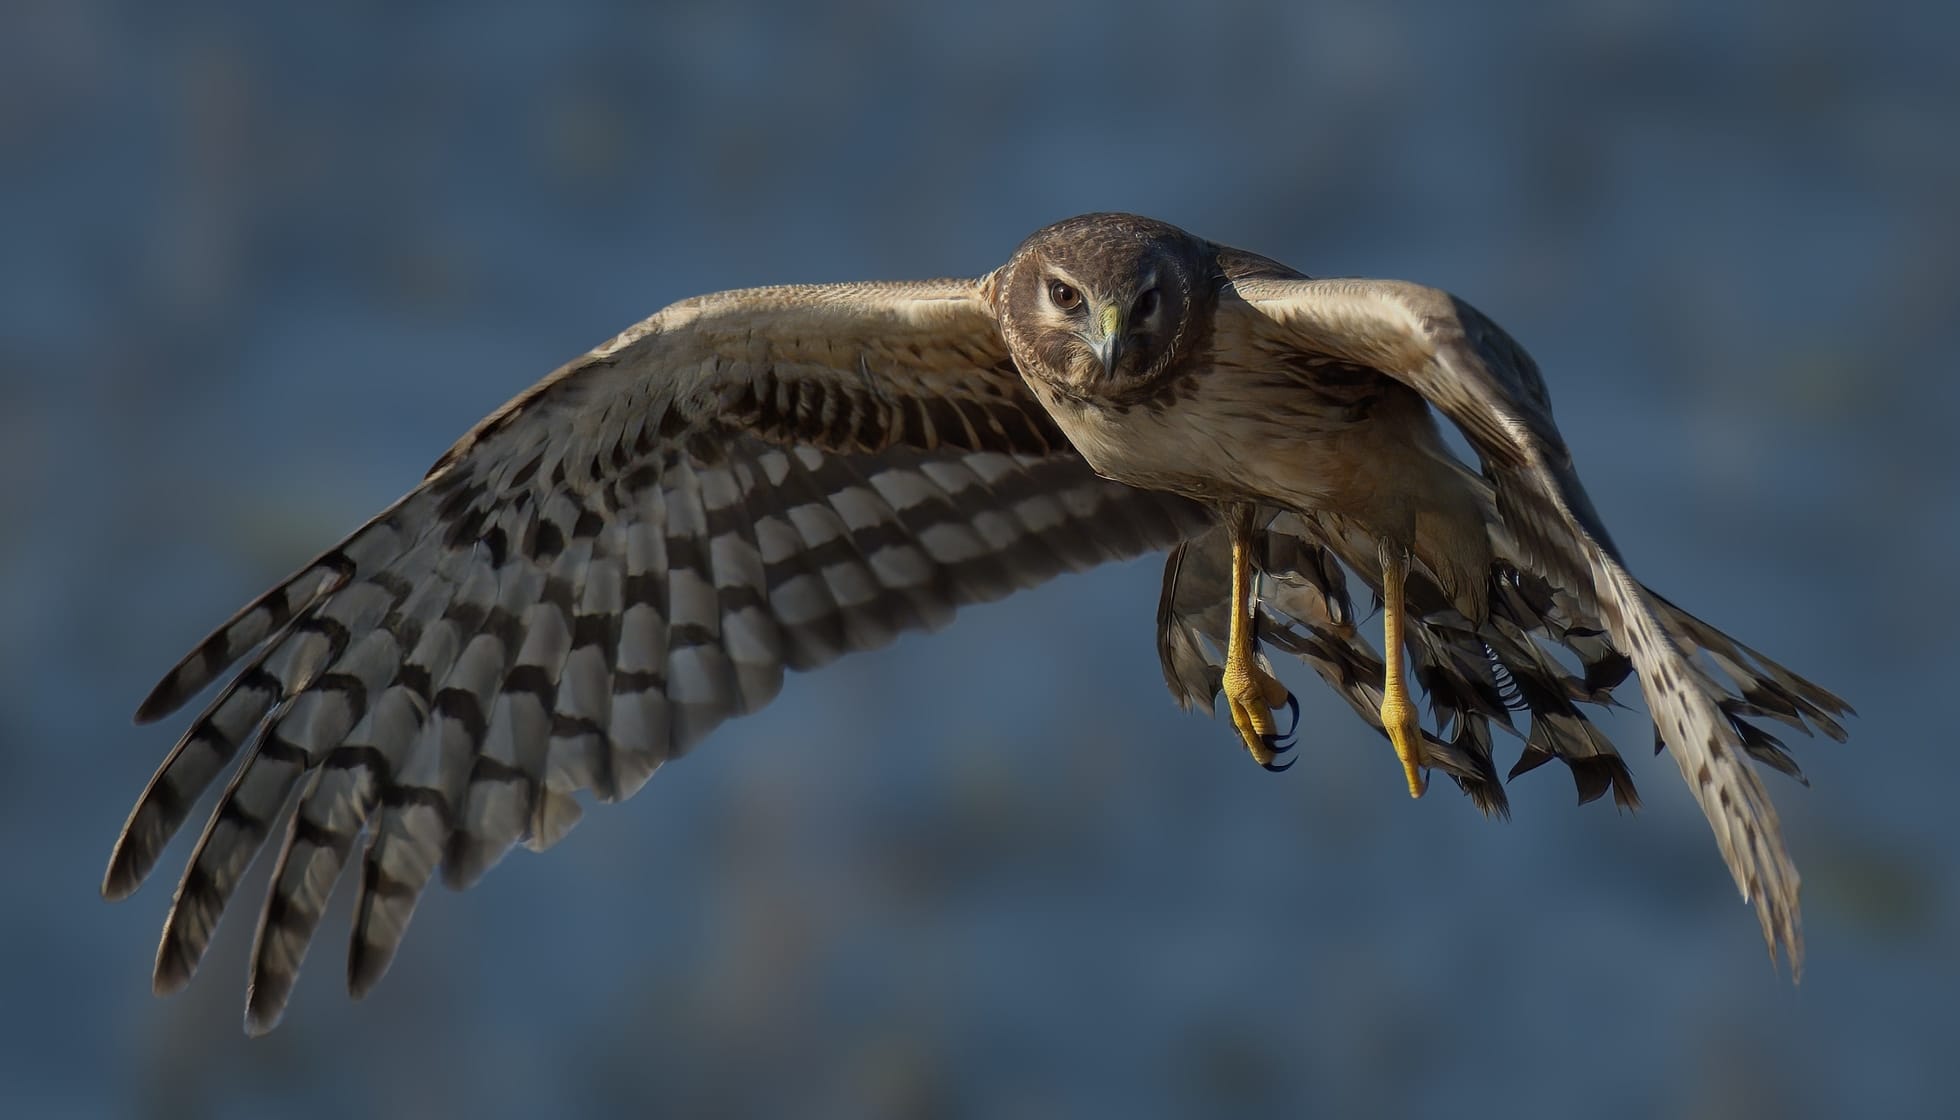  Northern Harrier flying in the sky